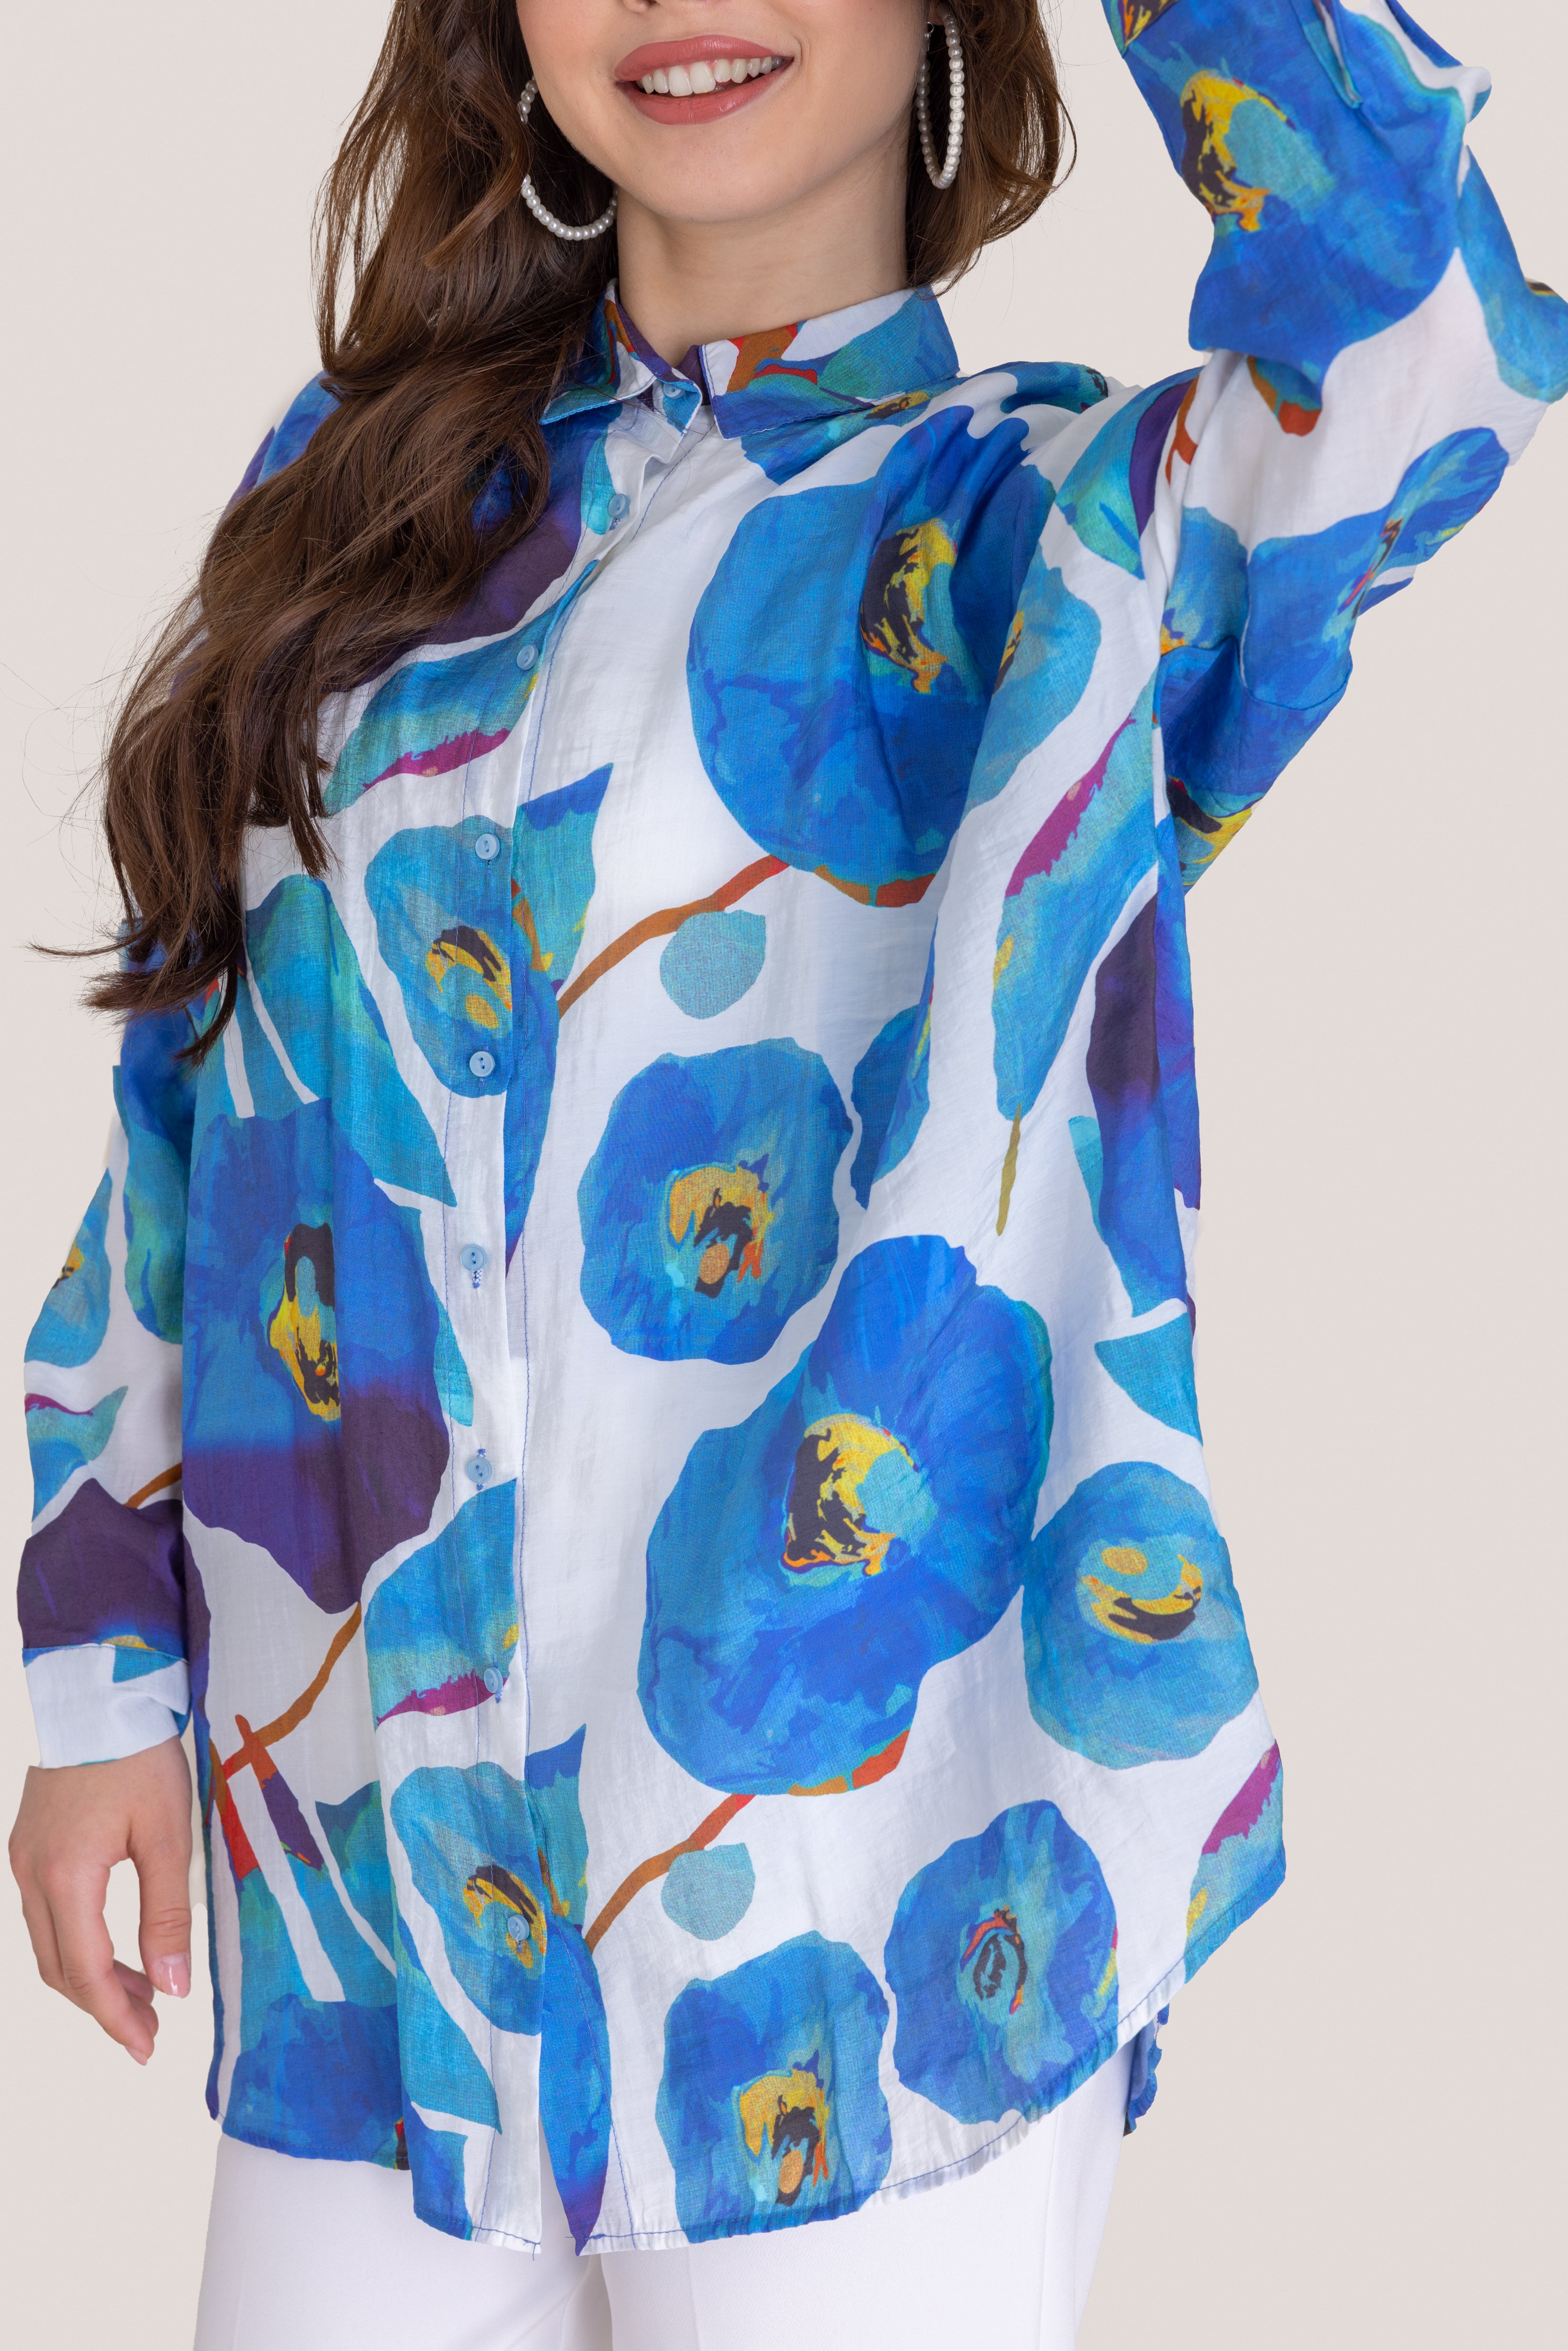 Floral Print Loose Fit Top - Blue/White